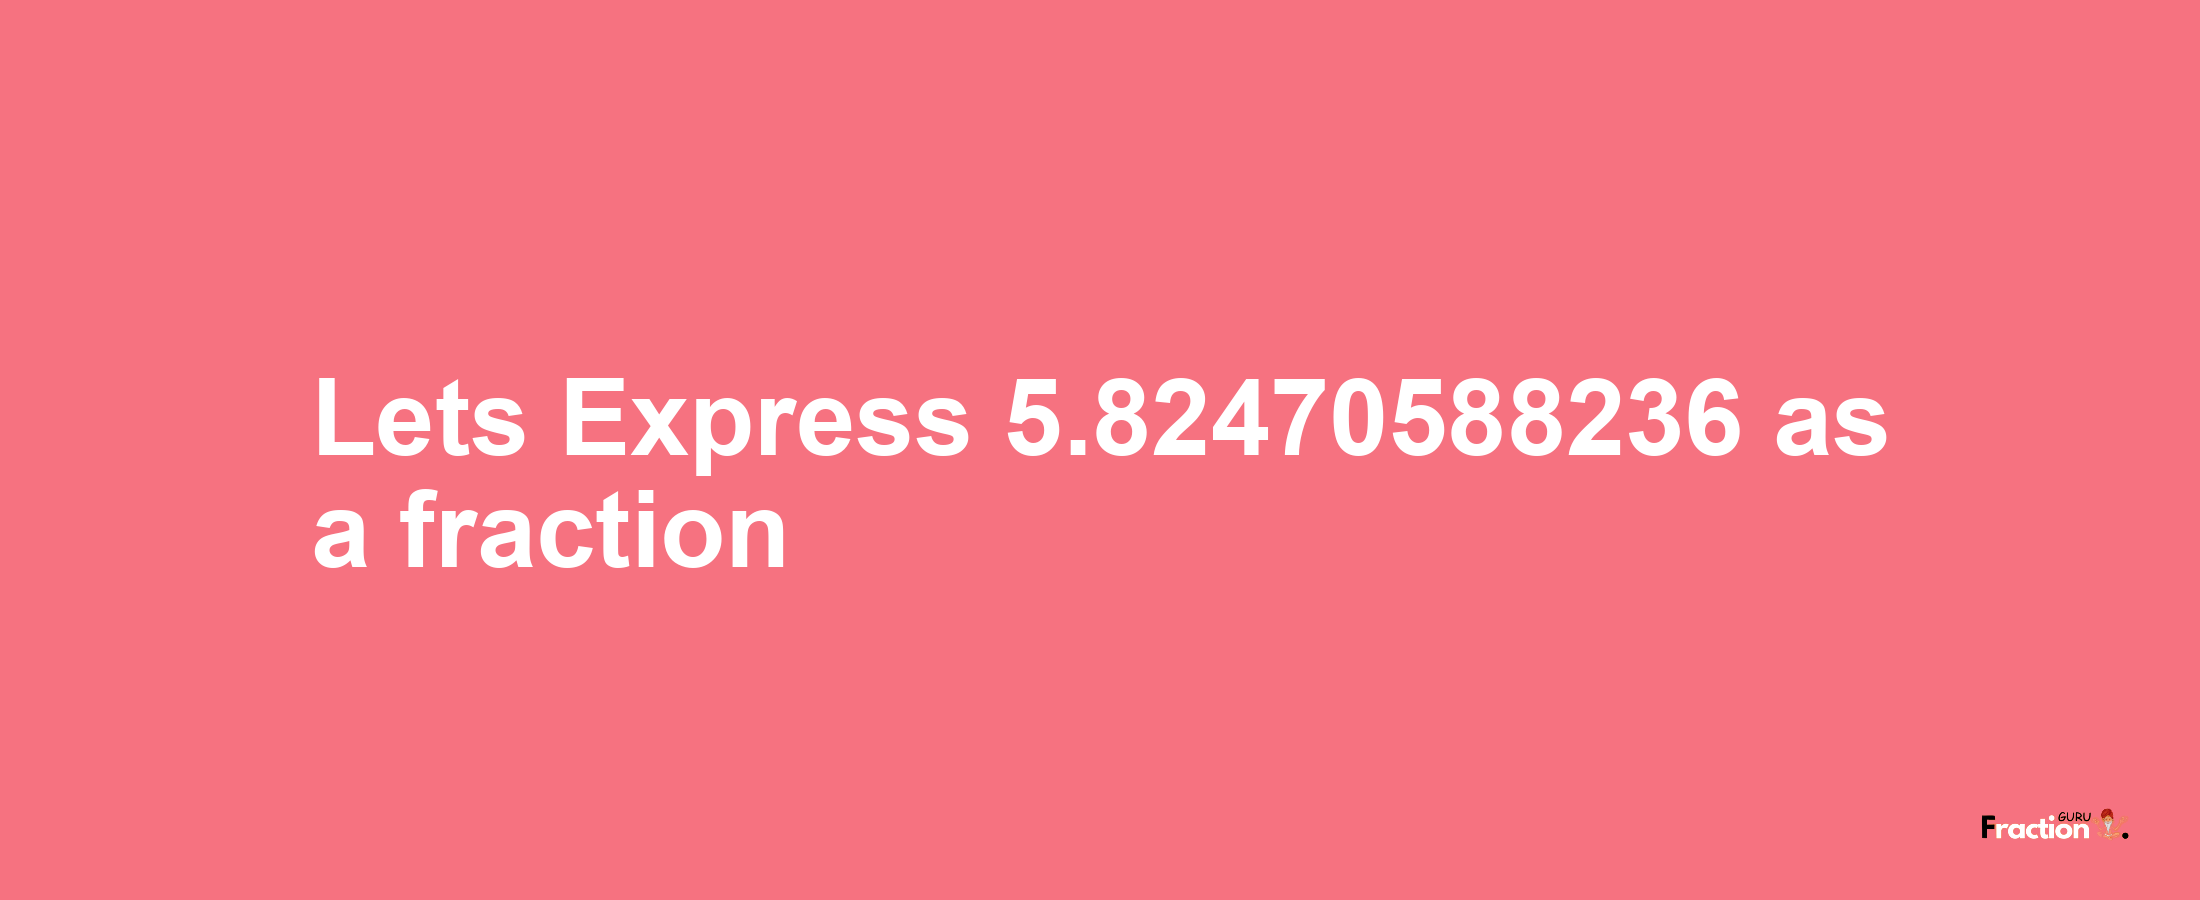 Lets Express 5.82470588236 as afraction